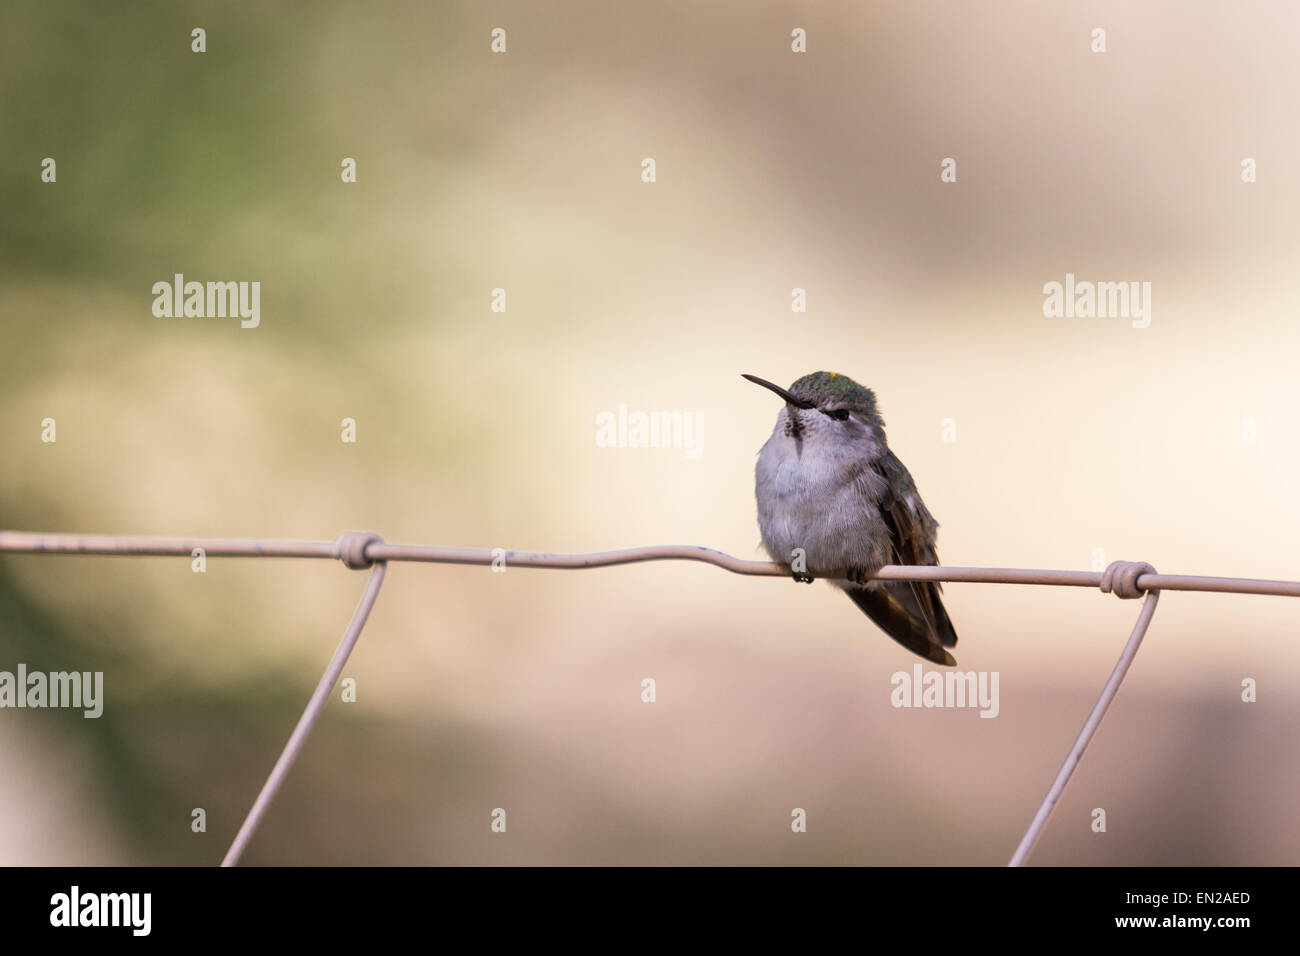 female anna's hummingbird puffed up and resting on a fence on a hot desert day. Stock Photo